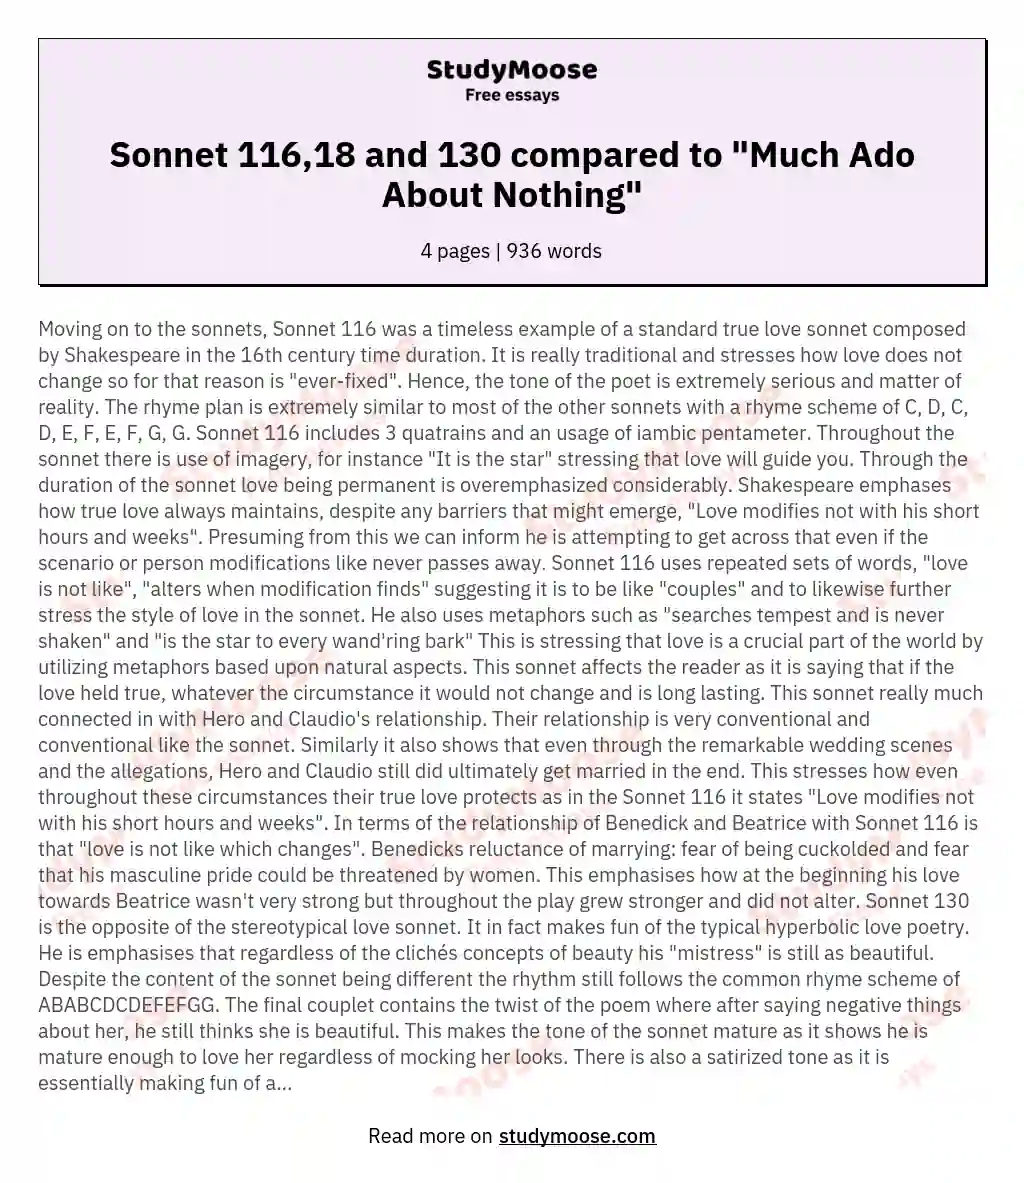 Sonnet 116,18 and 130 compared to "Much Ado About Nothing"